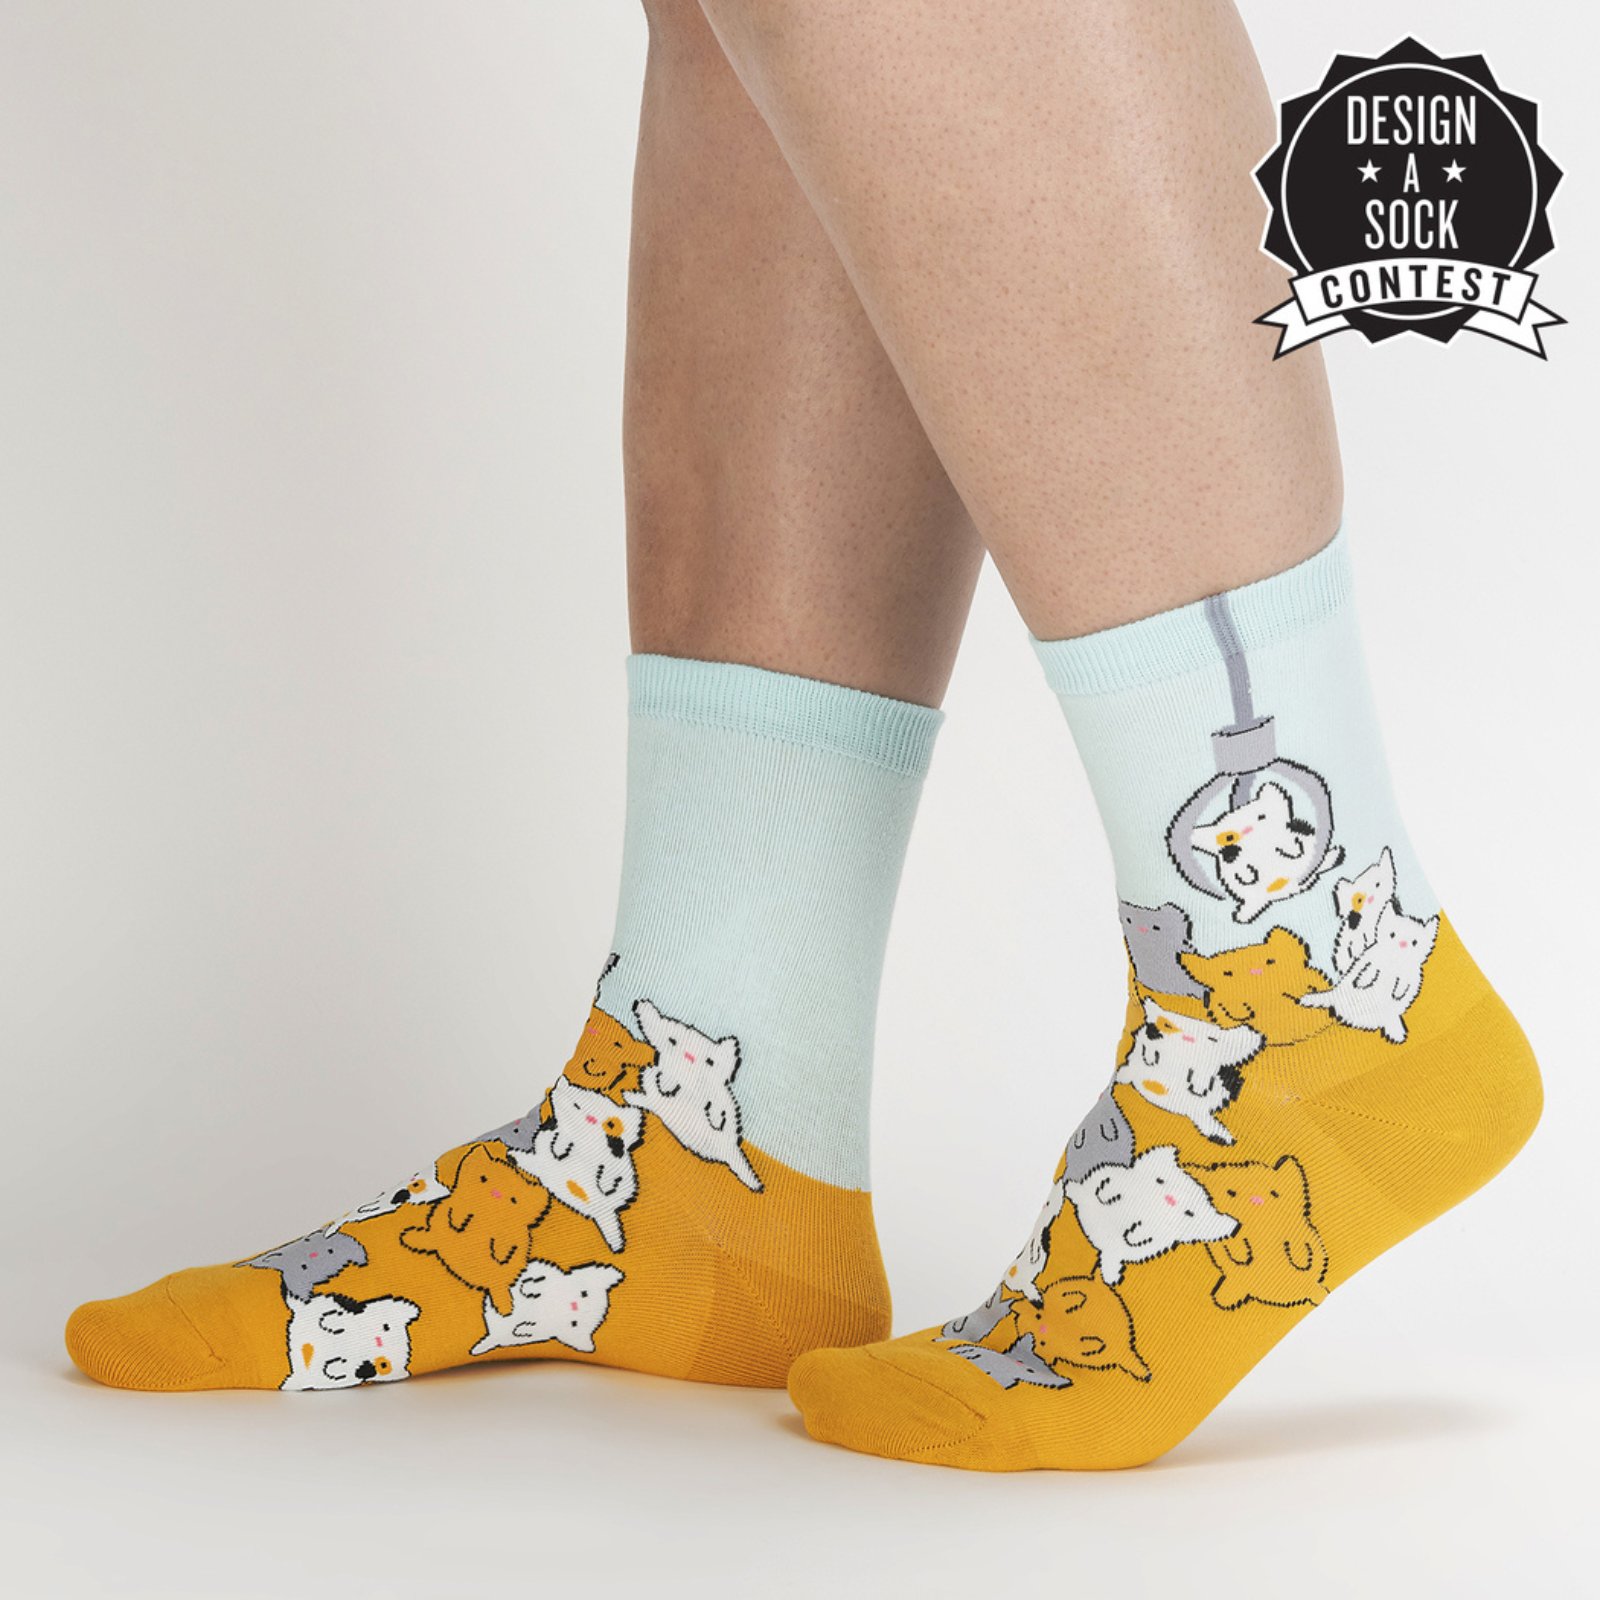 Sock It To Me Cat Claw women's sock featuring light blue and yellow sock with claw prize machine catching a cat as worn by model seen from side